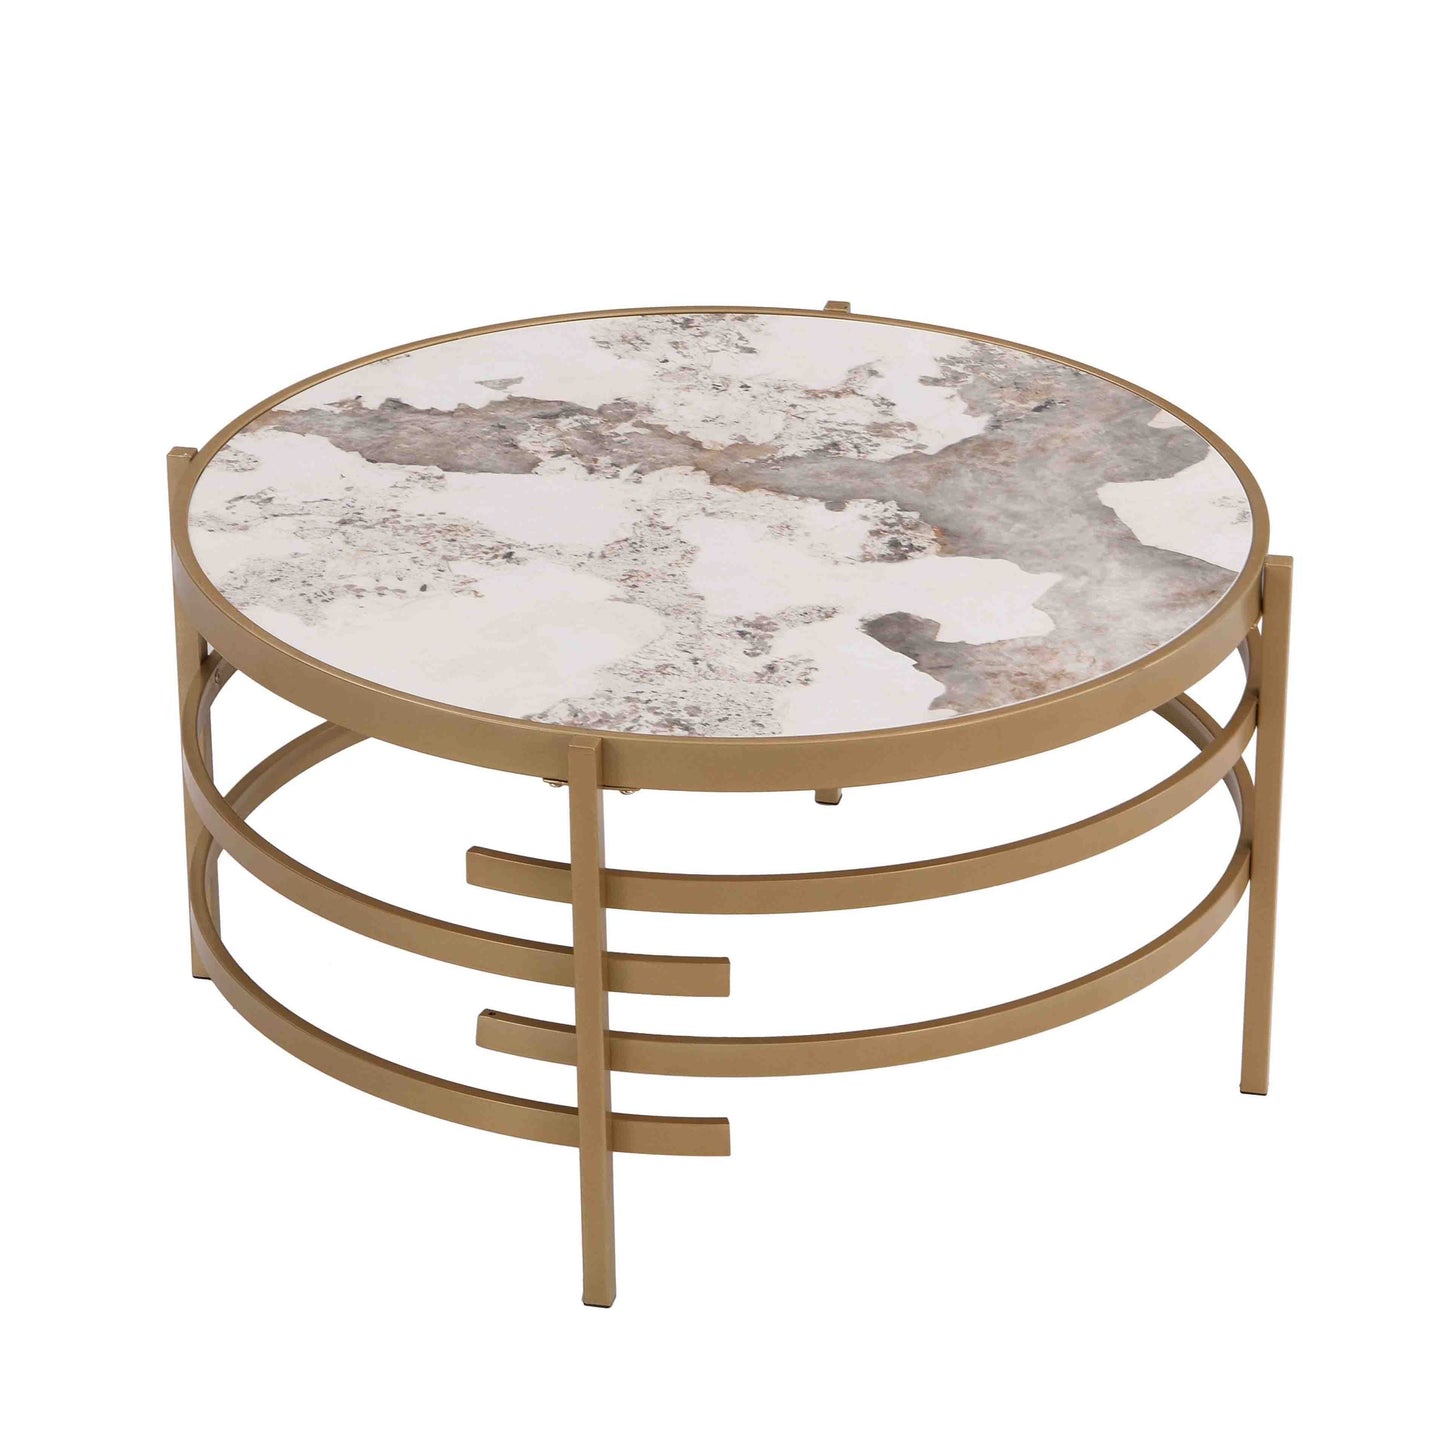 Sintered Stone Coffee Table (gold)